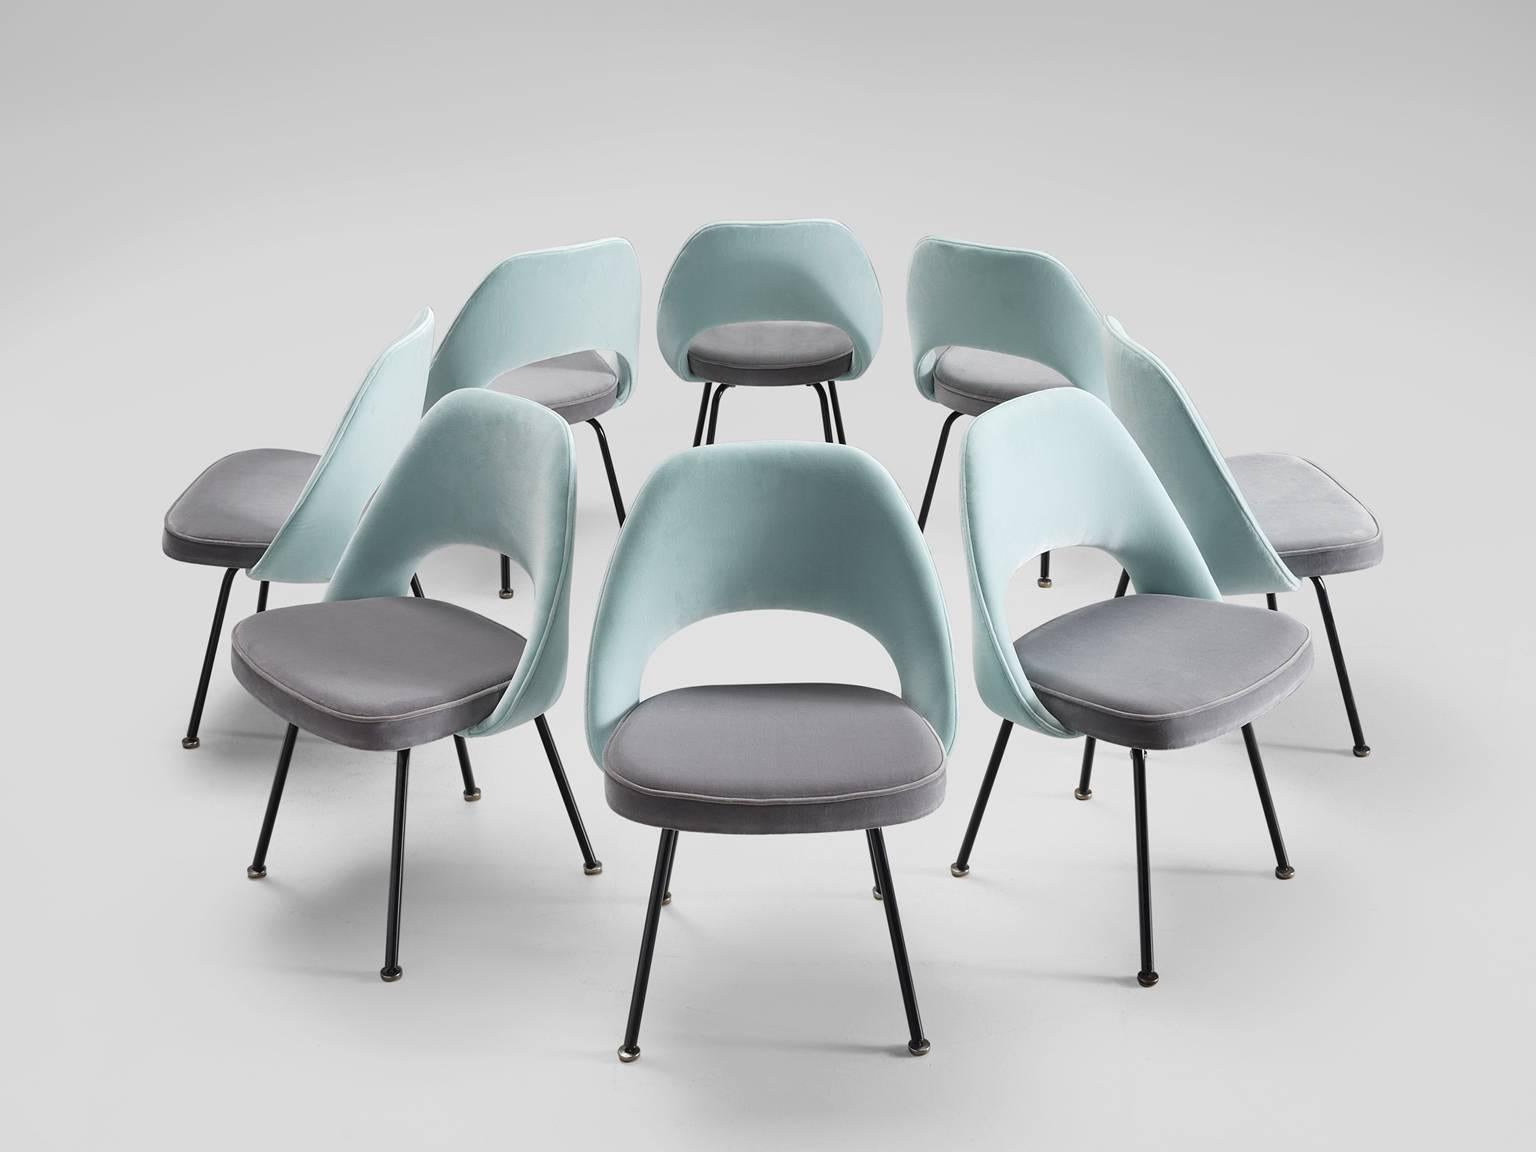 Eero Saarinen for Knoll International, set of eight chairs model 72, metal and fabric, by United States 1948. 

Eight organic shaped chairs designed by Eero Saarinen. This iconic model is reupholstered in a soft sea-green and grey velvet fabric. The